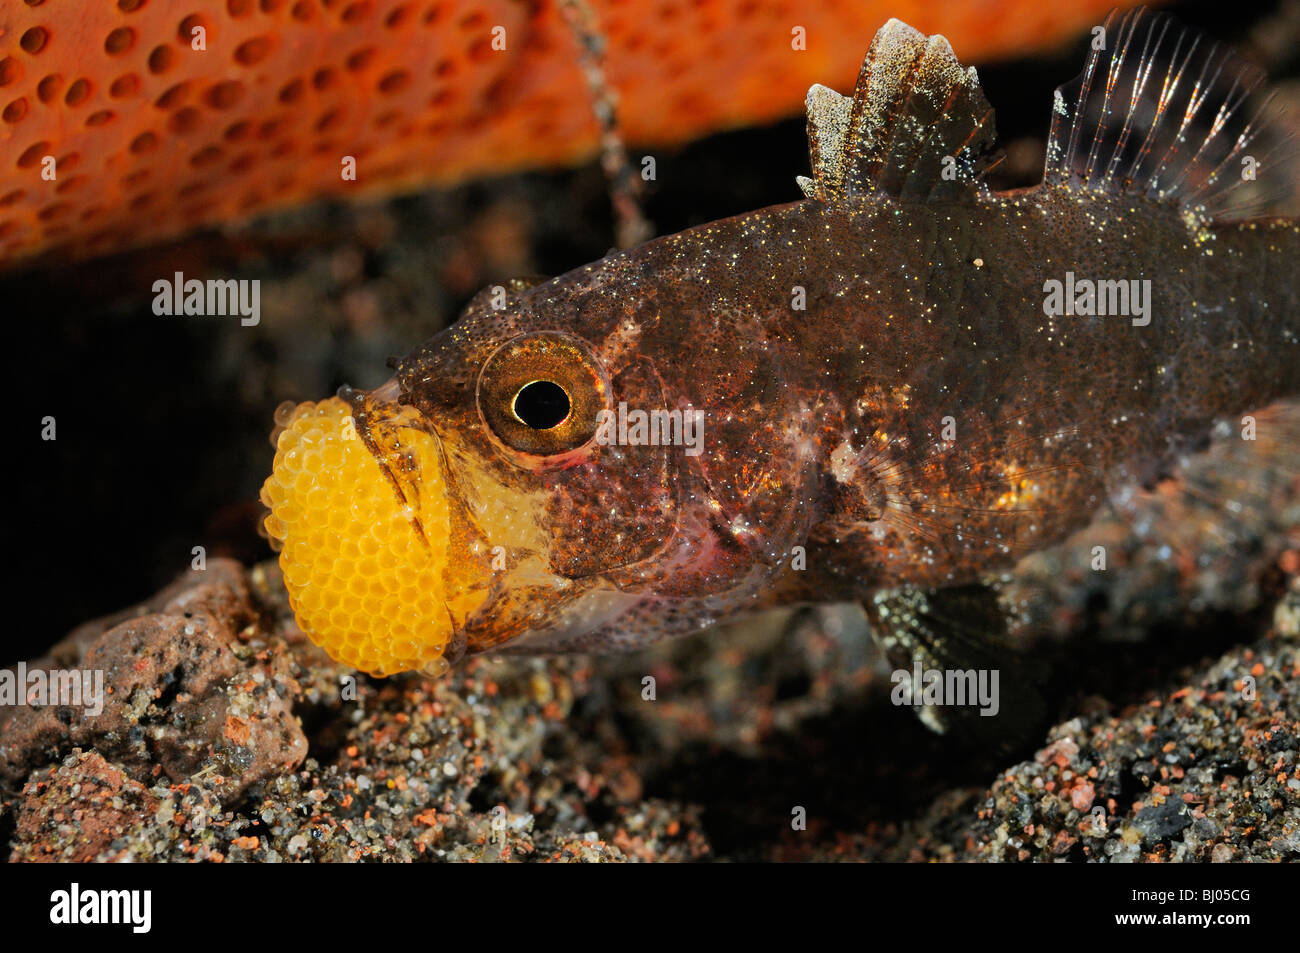 Apogon sp., mouthbrooding Cardinalfish with eggs in the mouth, Tulamben, Bali, Indonesia, Indo-Pacific Ocean Stock Photo